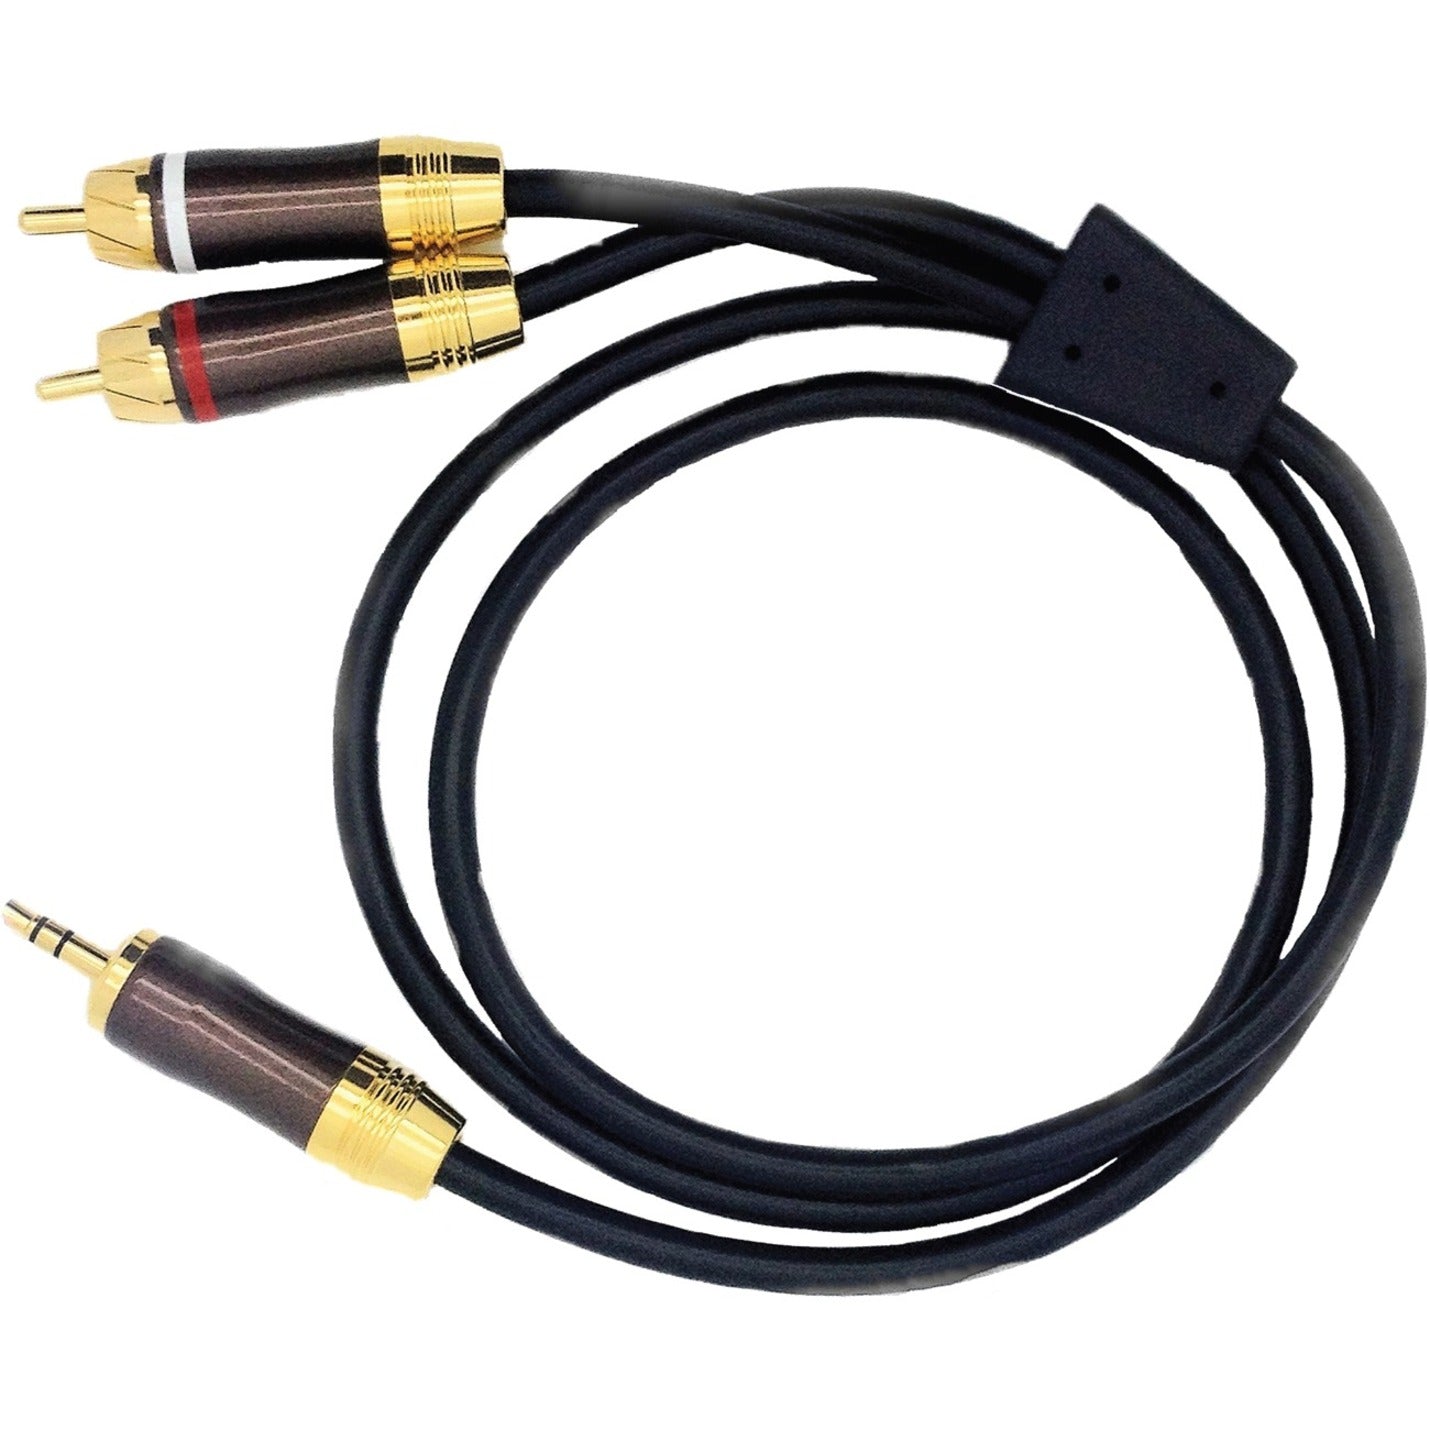 W Box VCY3BKG3 RCA to 3.5mm Stereo Y Cable, 3 ft, Gold Plated, Black